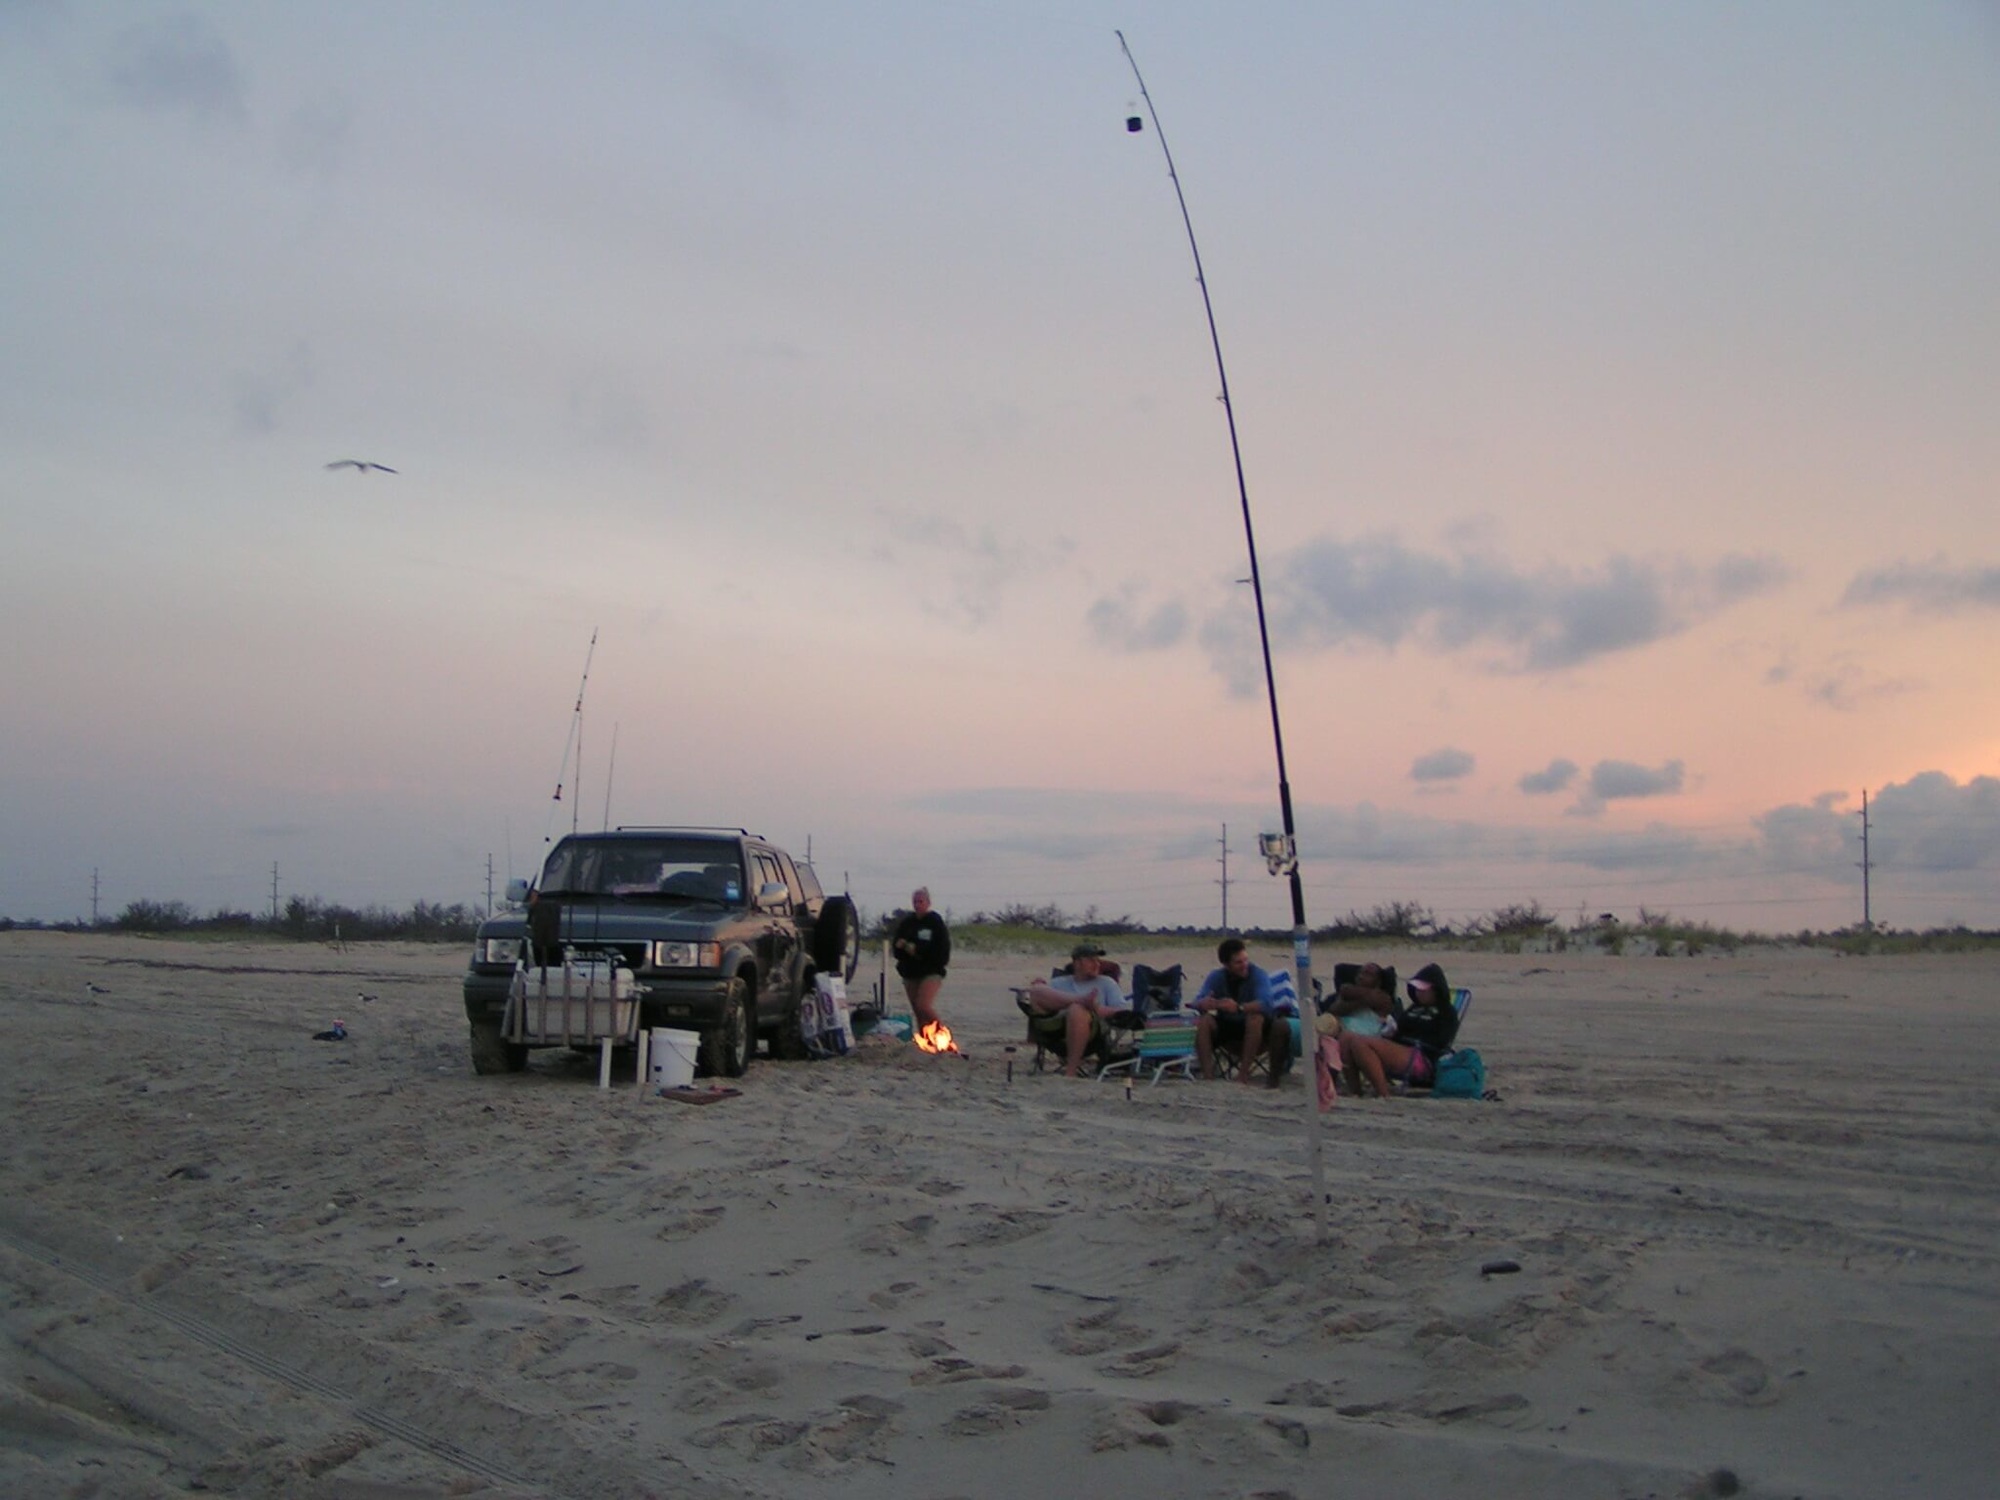 Surf Park: Cape Hatteras Has The Best Surf Fishing On The Atlantic Coast